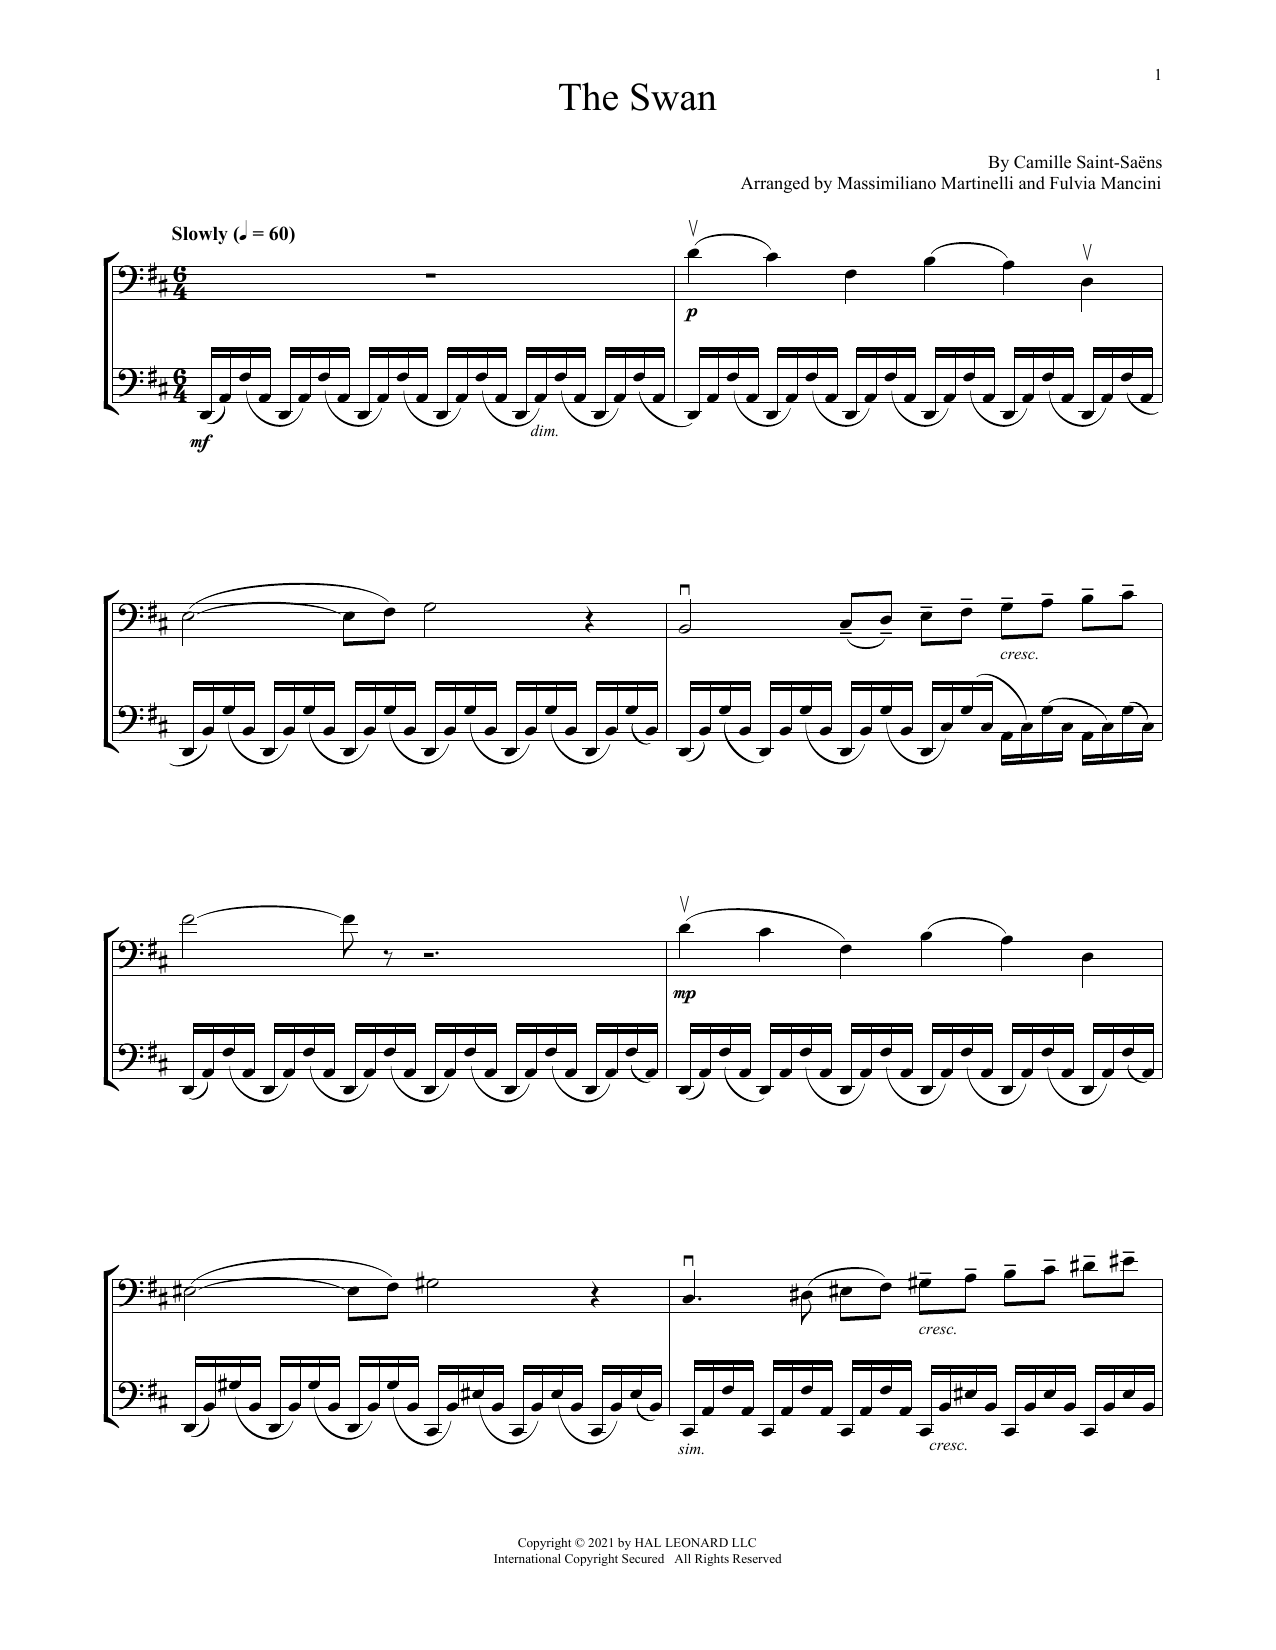 Download Mr & Mrs Cello The Swan Sheet Music